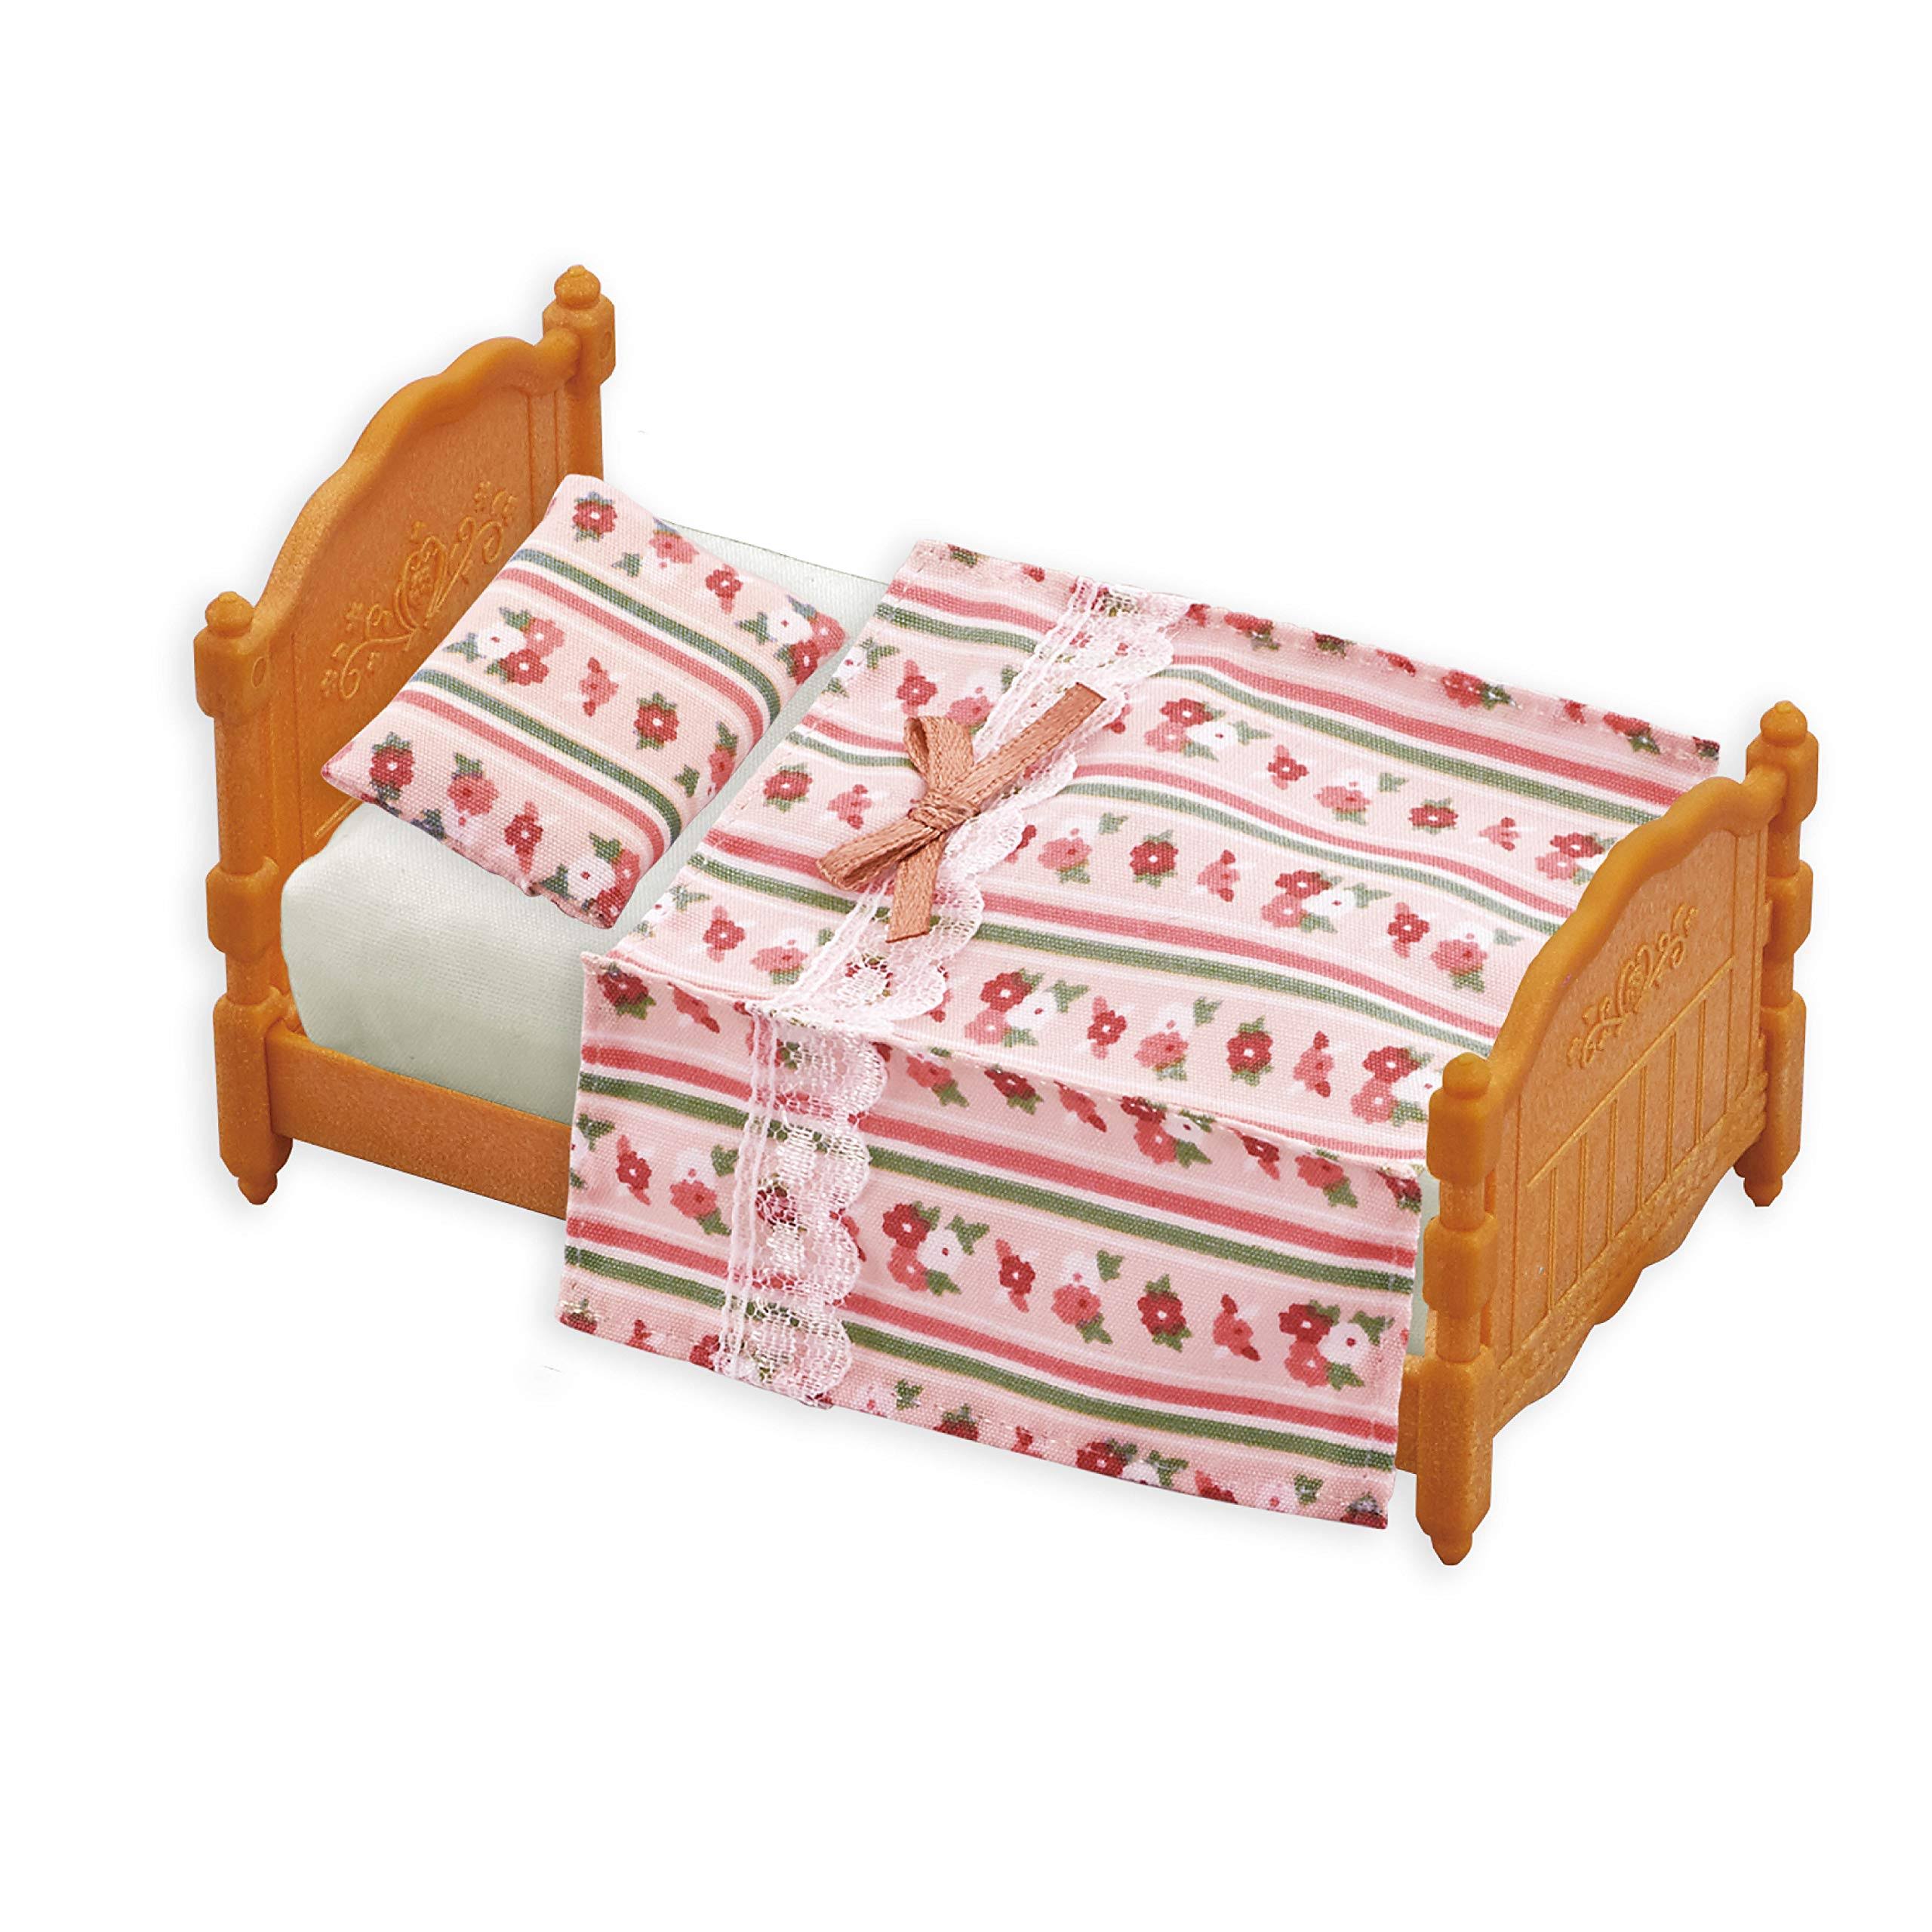 Calico Critters, Doll House Furniture and Décor, Bed & Comforter Set